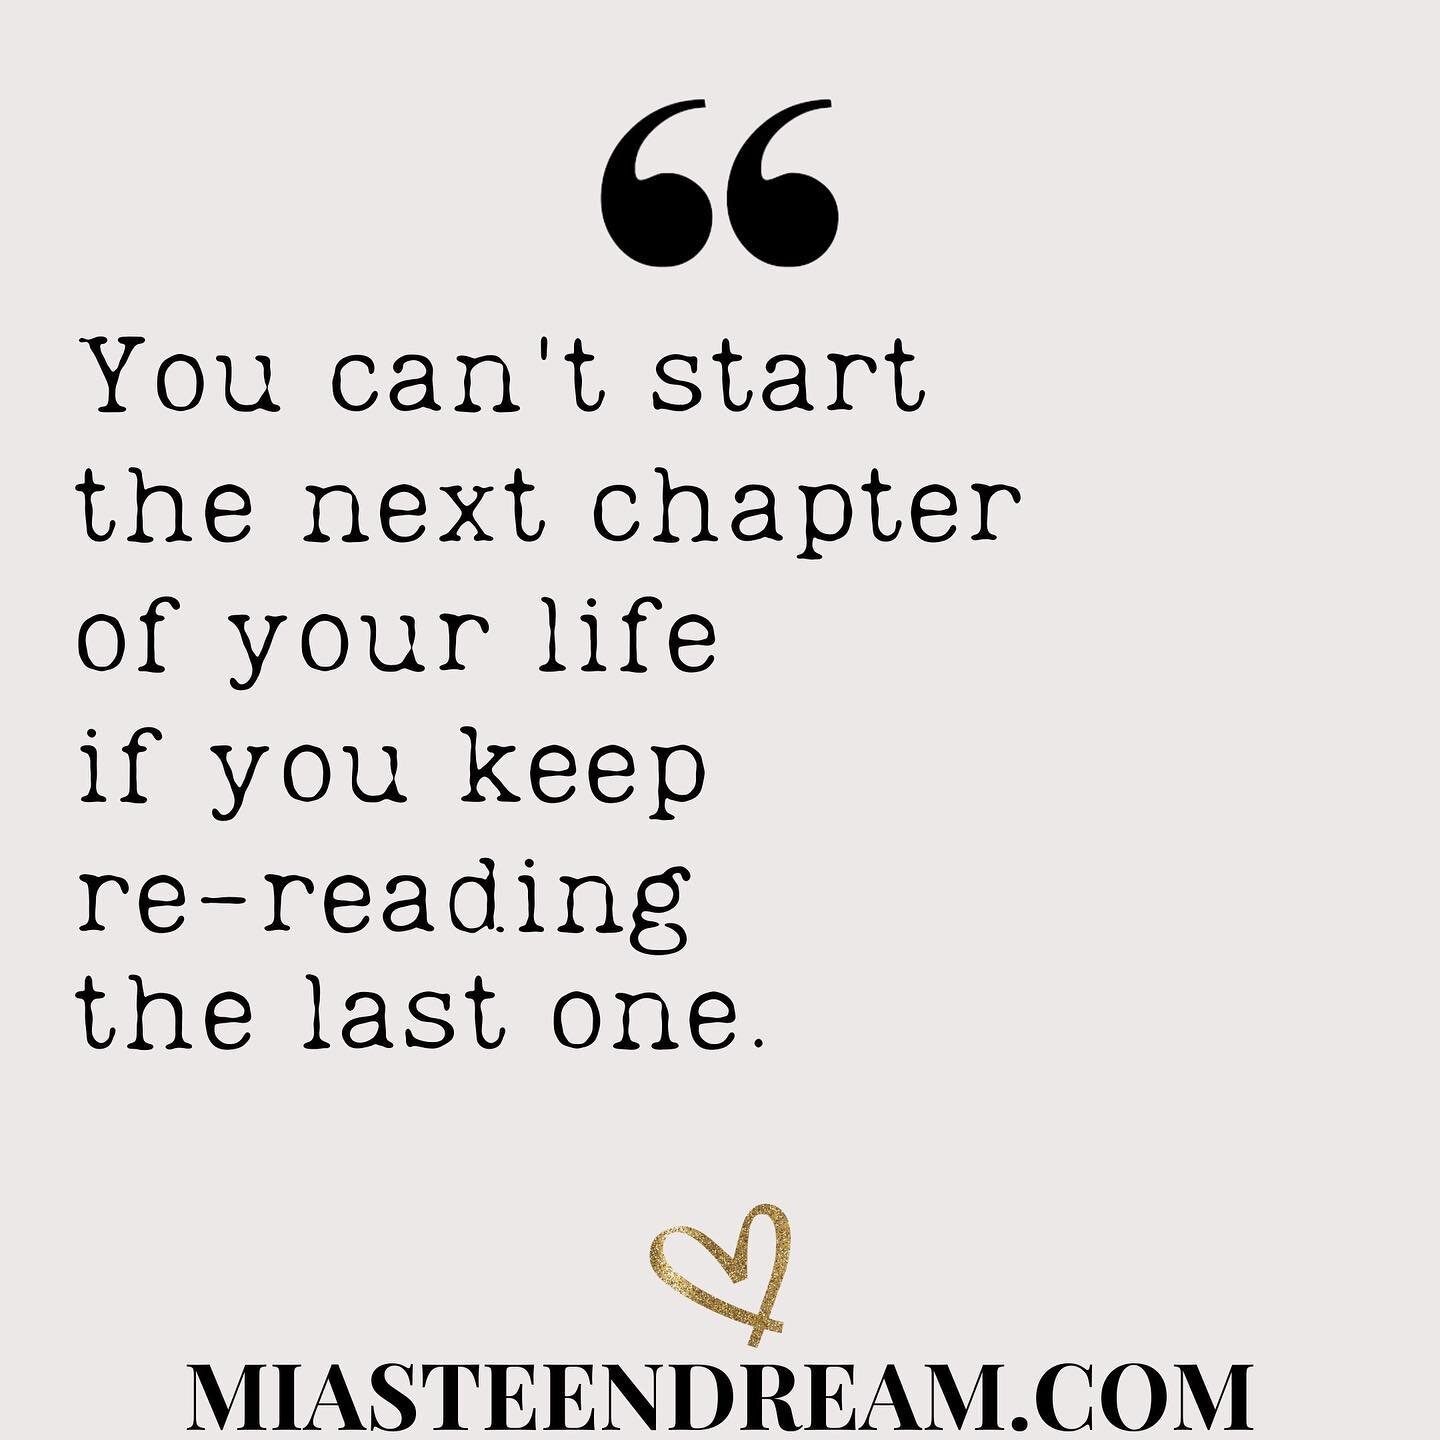 Many of us hold onto the past.😕🌩

We hold onto the things that keep us awake at night, make us feel overly angry or sad, and struggle to let go of the unchangeable past.💫😢

This quote is so true!🌸✨

To start a new chapter of your life, you need 